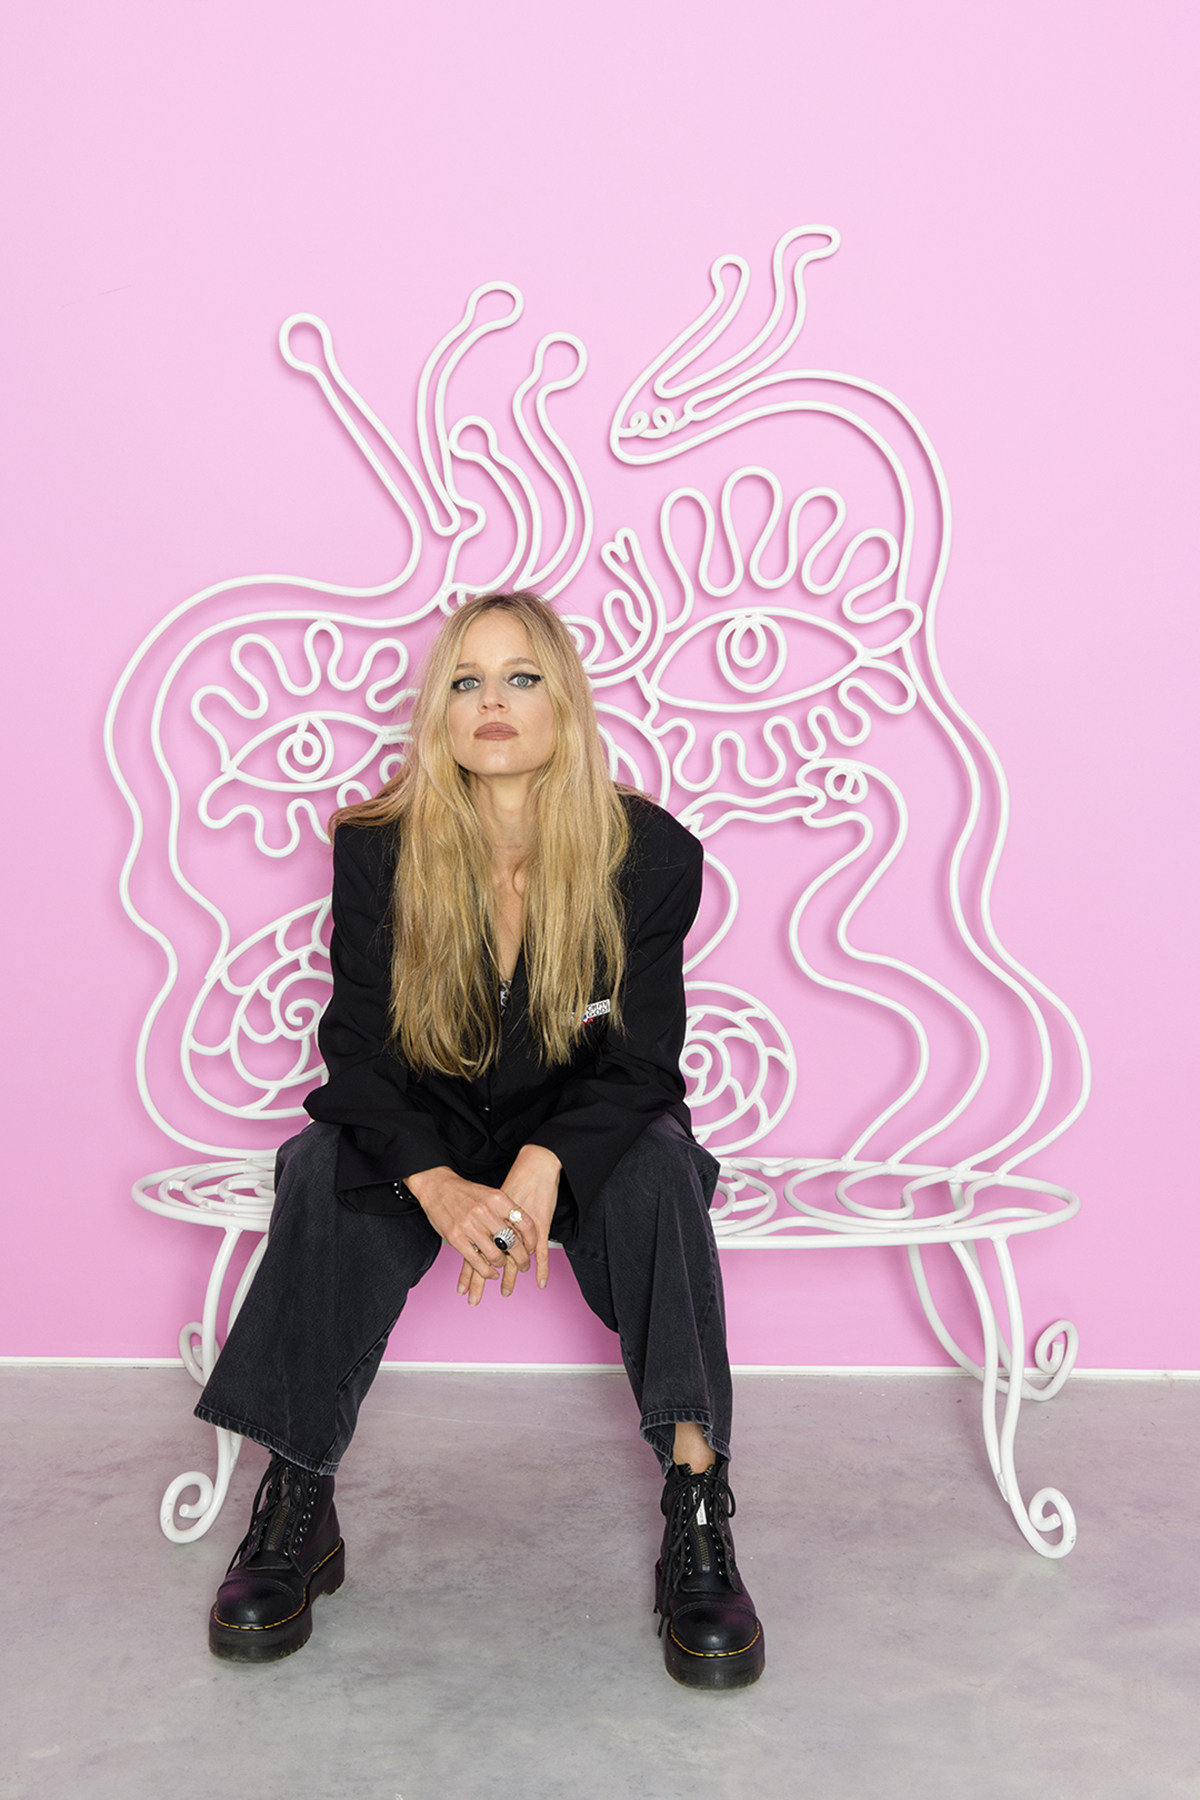 A blonde woman wearing a black suit sitting in a pink room on a white bench with squiggles coming out of it